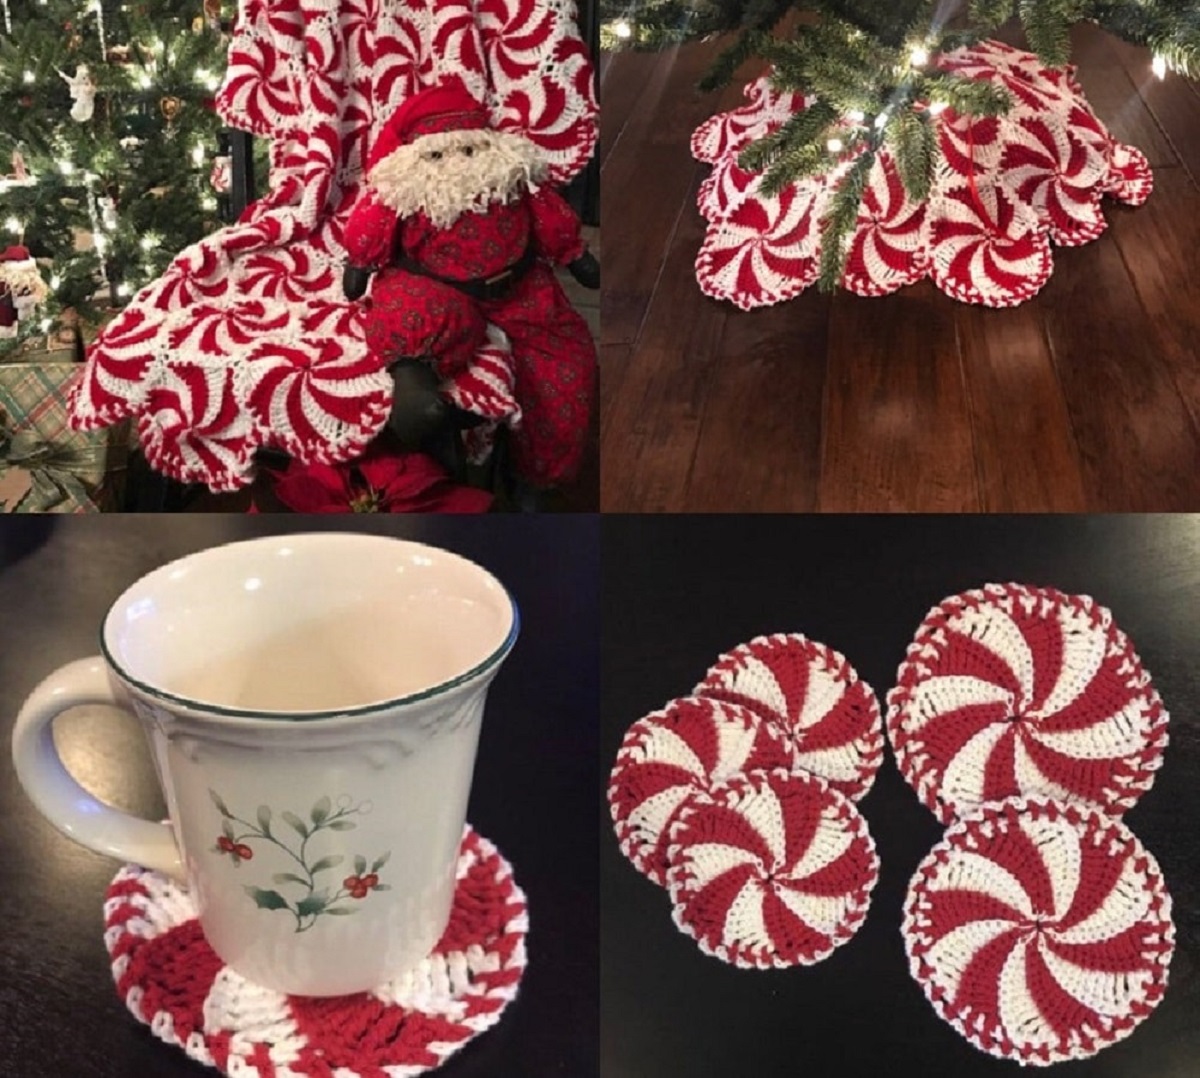 A red and white peppermint style crochet blanket draped over a chair with a Christmas tree cover in the same pattern and small coasters on a dark background.